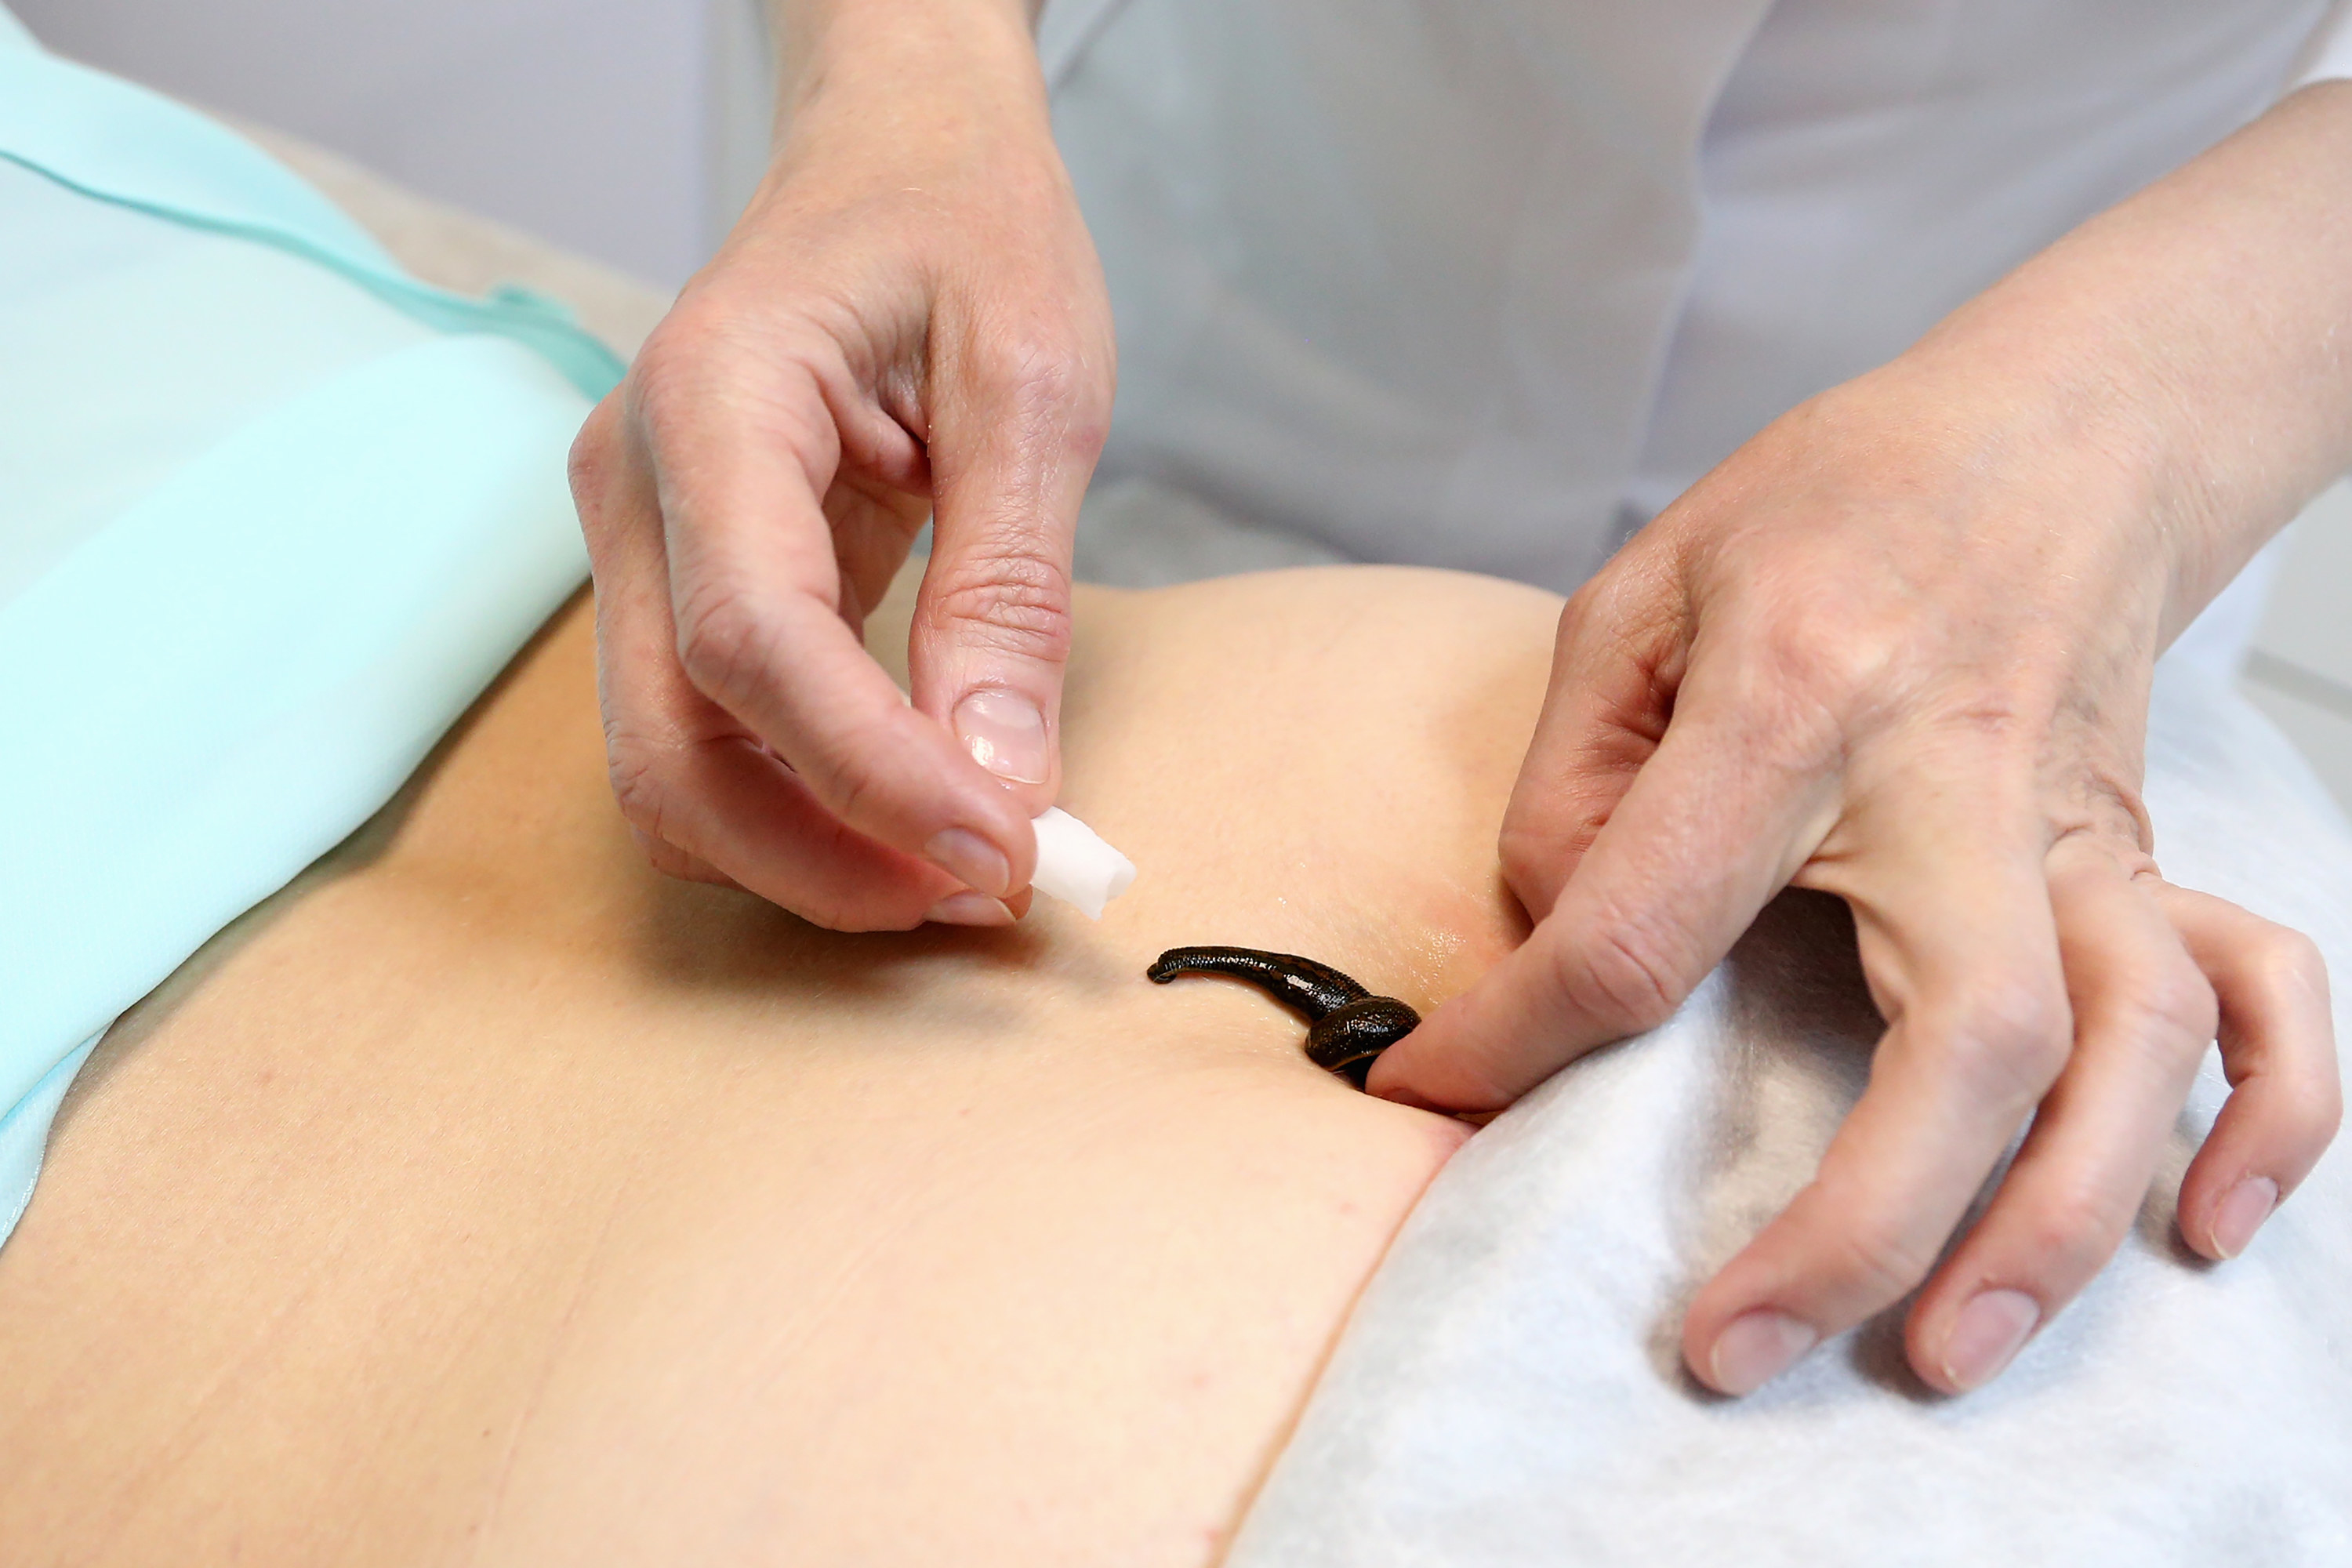 An image of a leech being placed on a woman&#x27;s belly by a medical professional